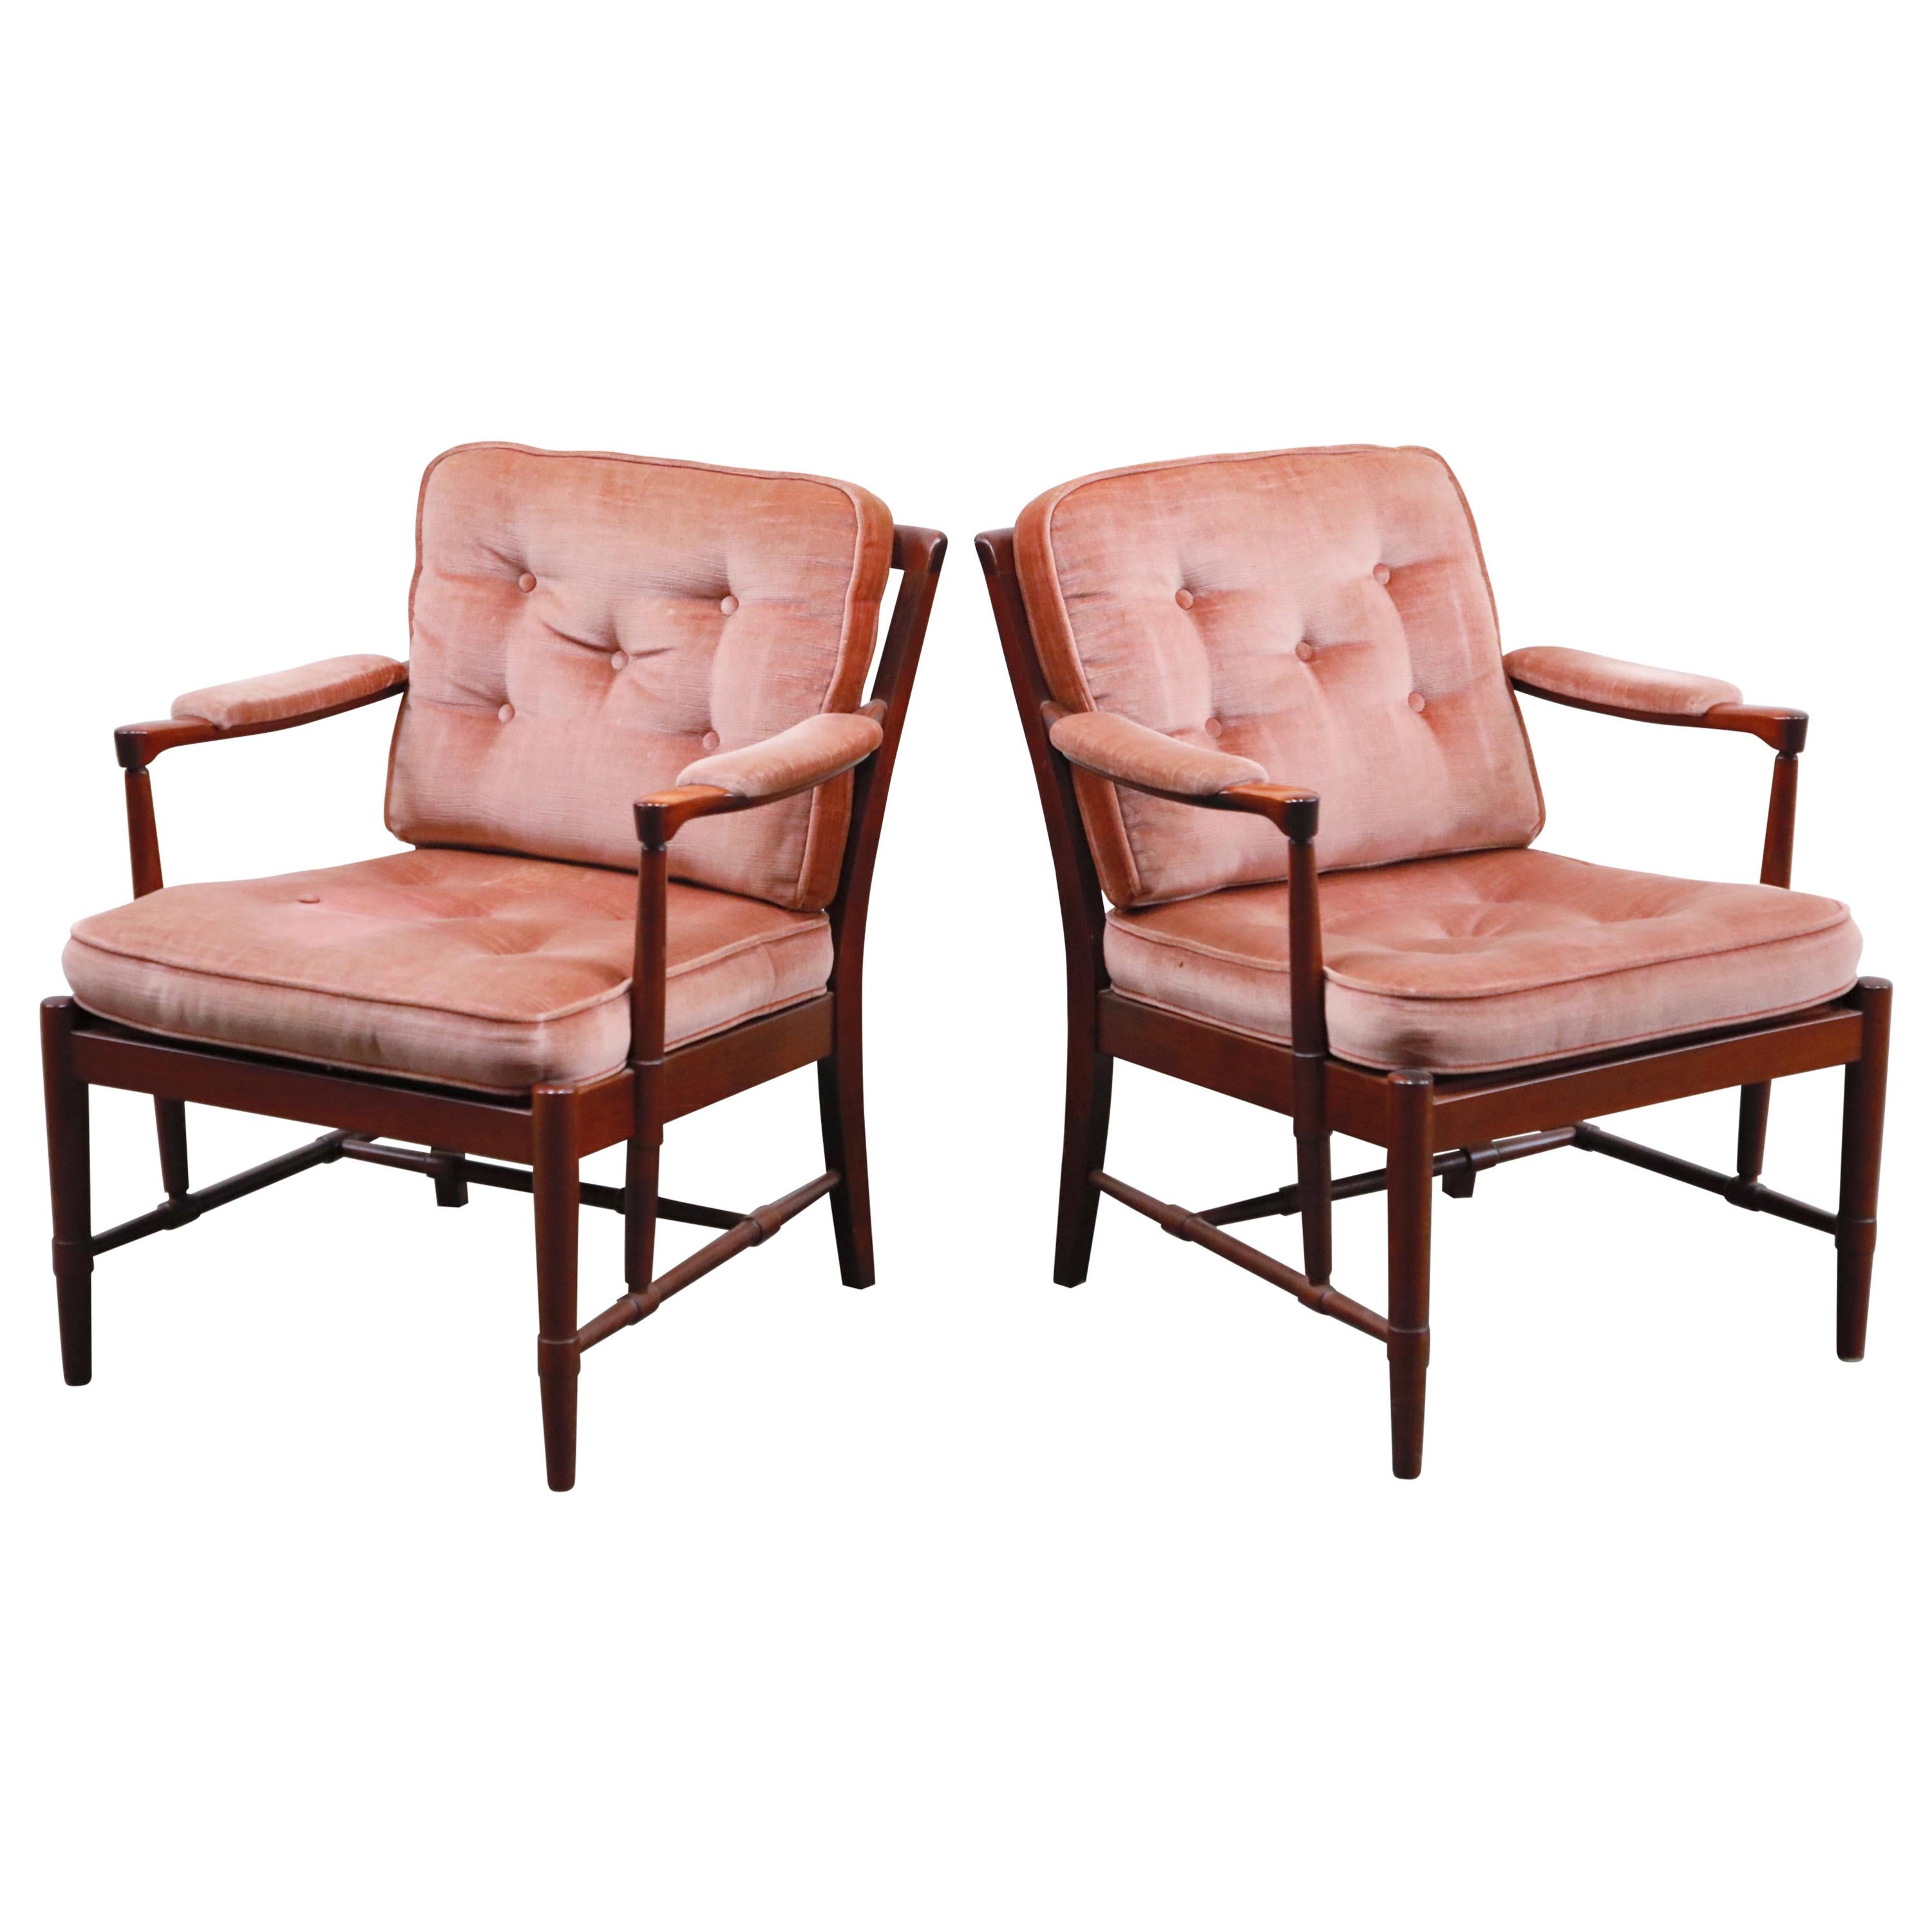 Pair of Pink Velvet and Rosewood Armchairs by Aksel Sorensen, 1970s, Signed